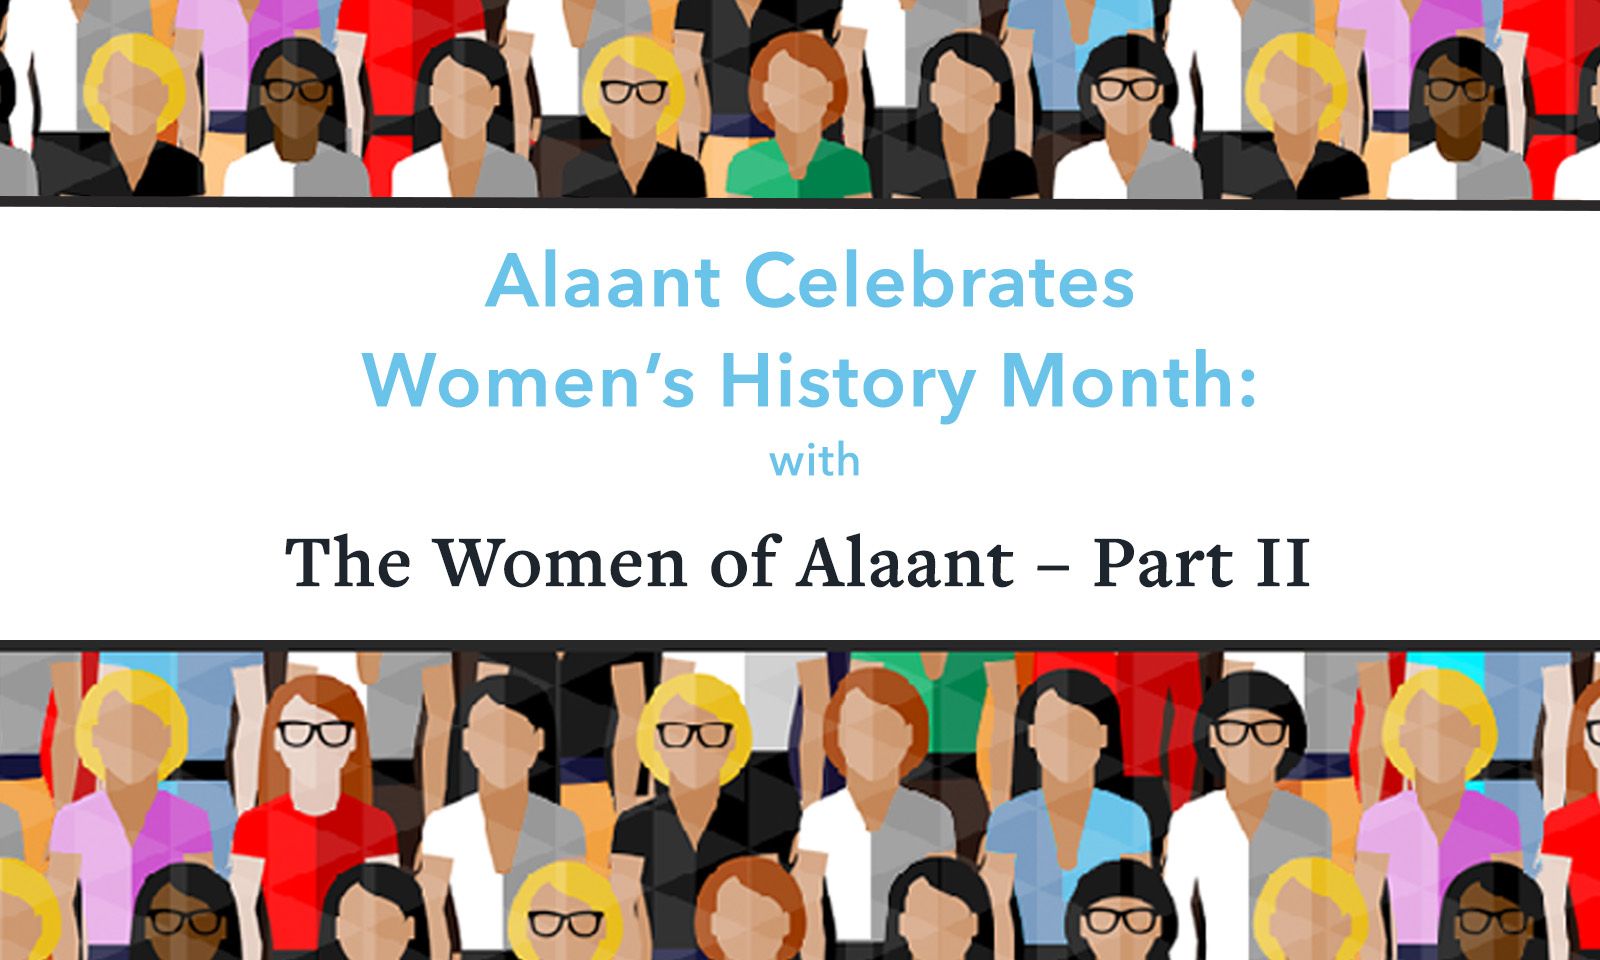 Alaant Celebrates Women’s History Month with The Women of Alaant – Part II